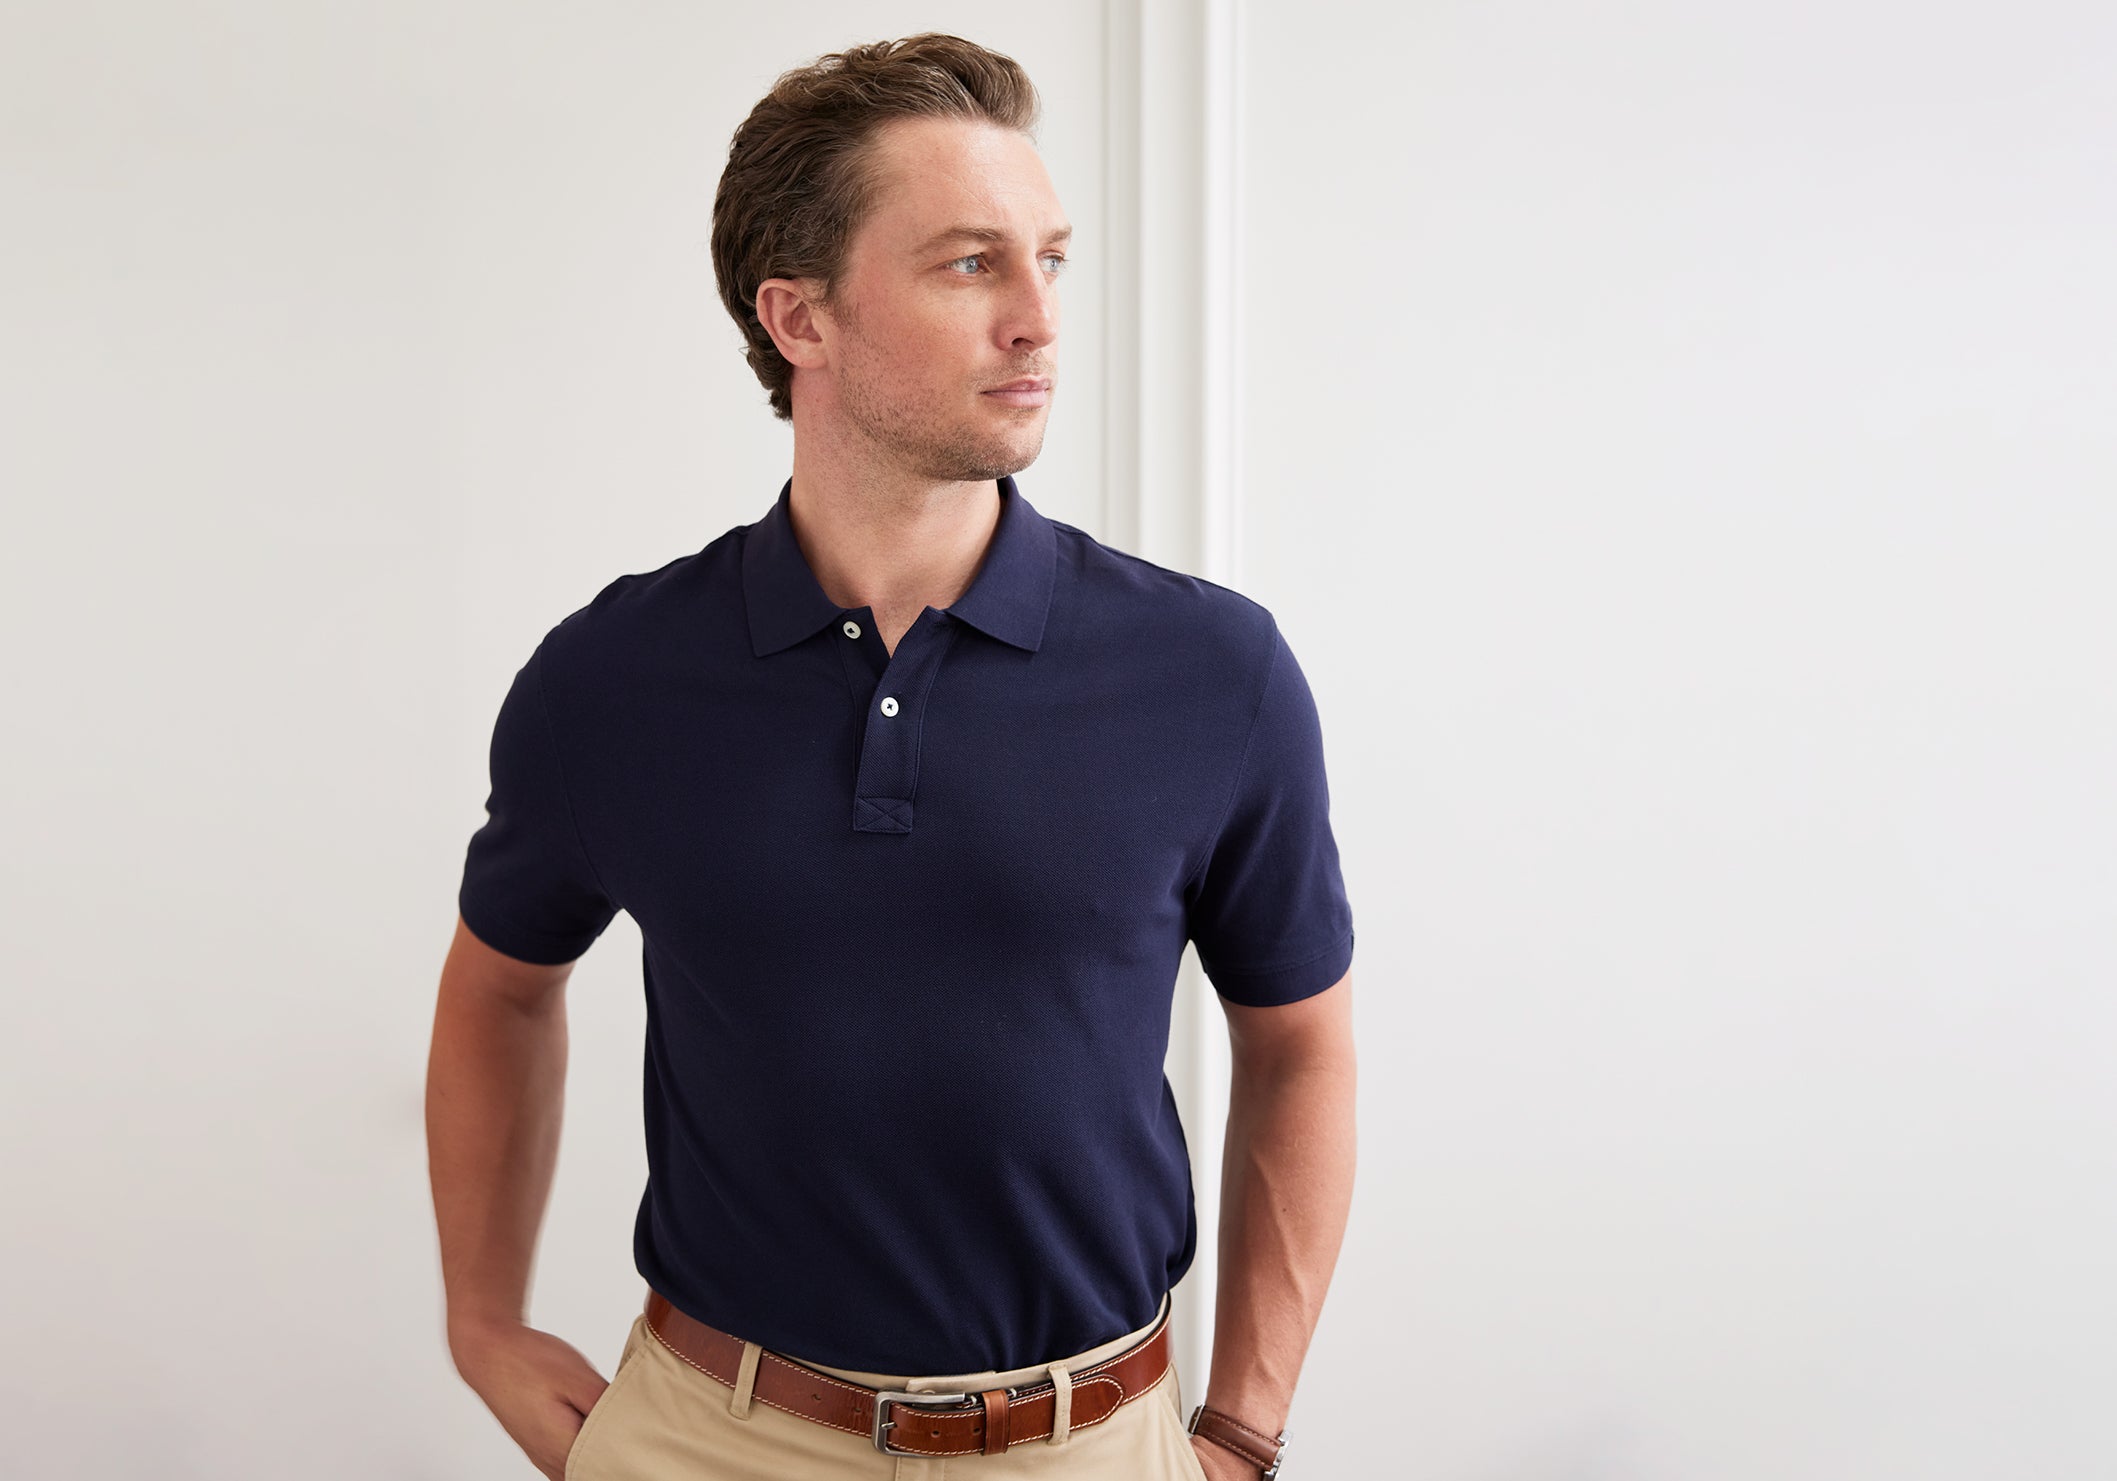 How to wear a polo shirt with jeans